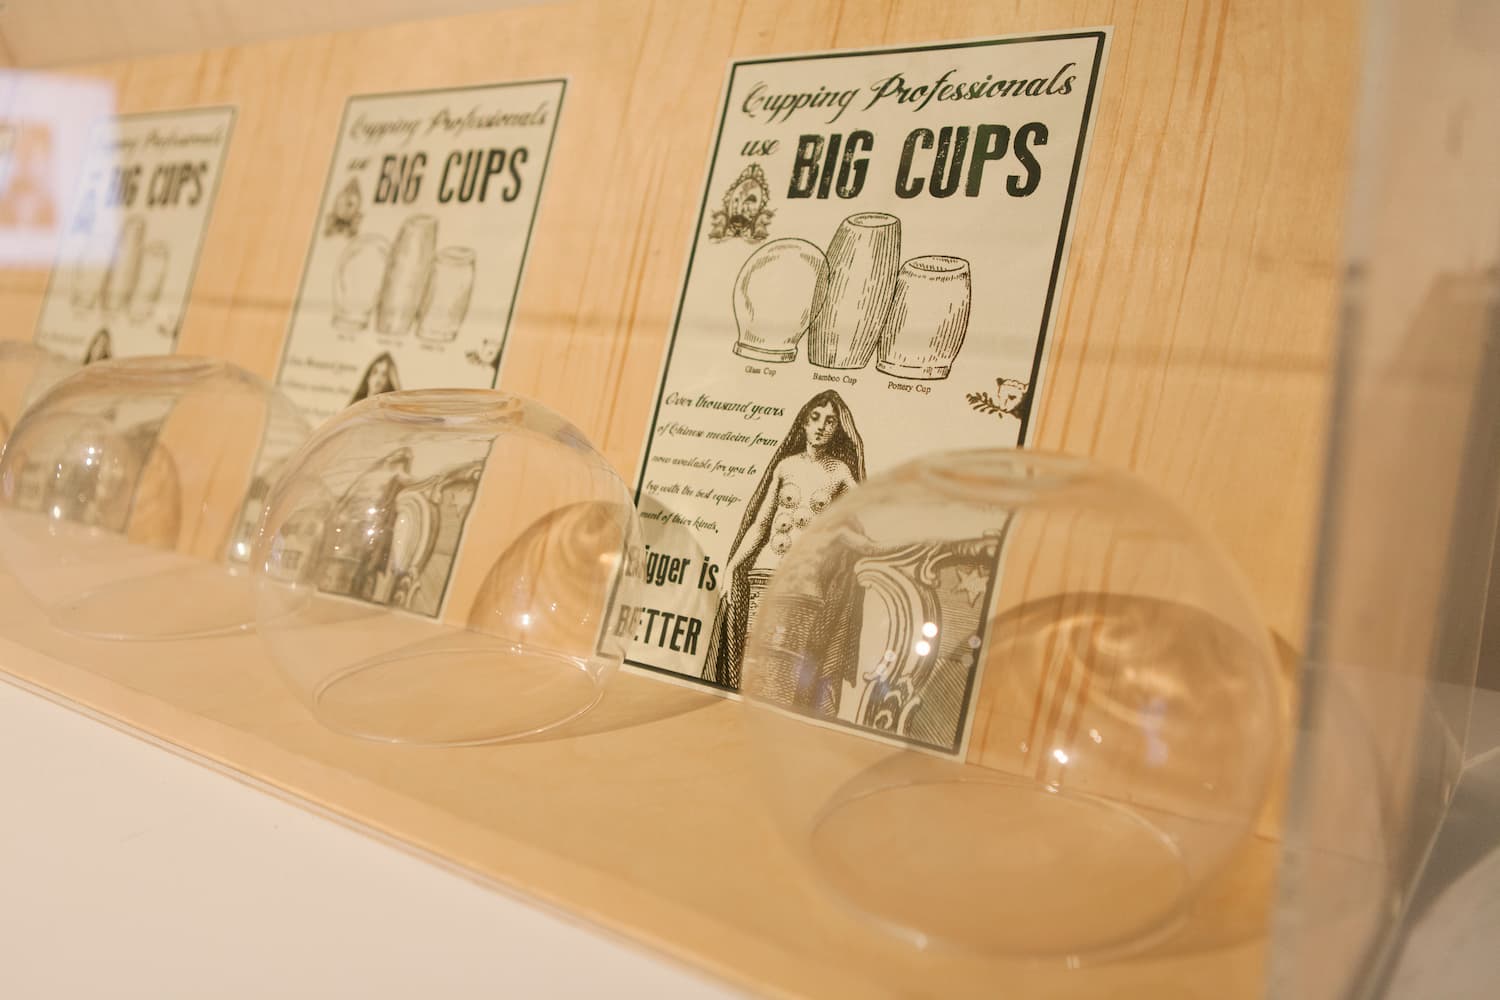 Cupping professionals use BIG CUPS.